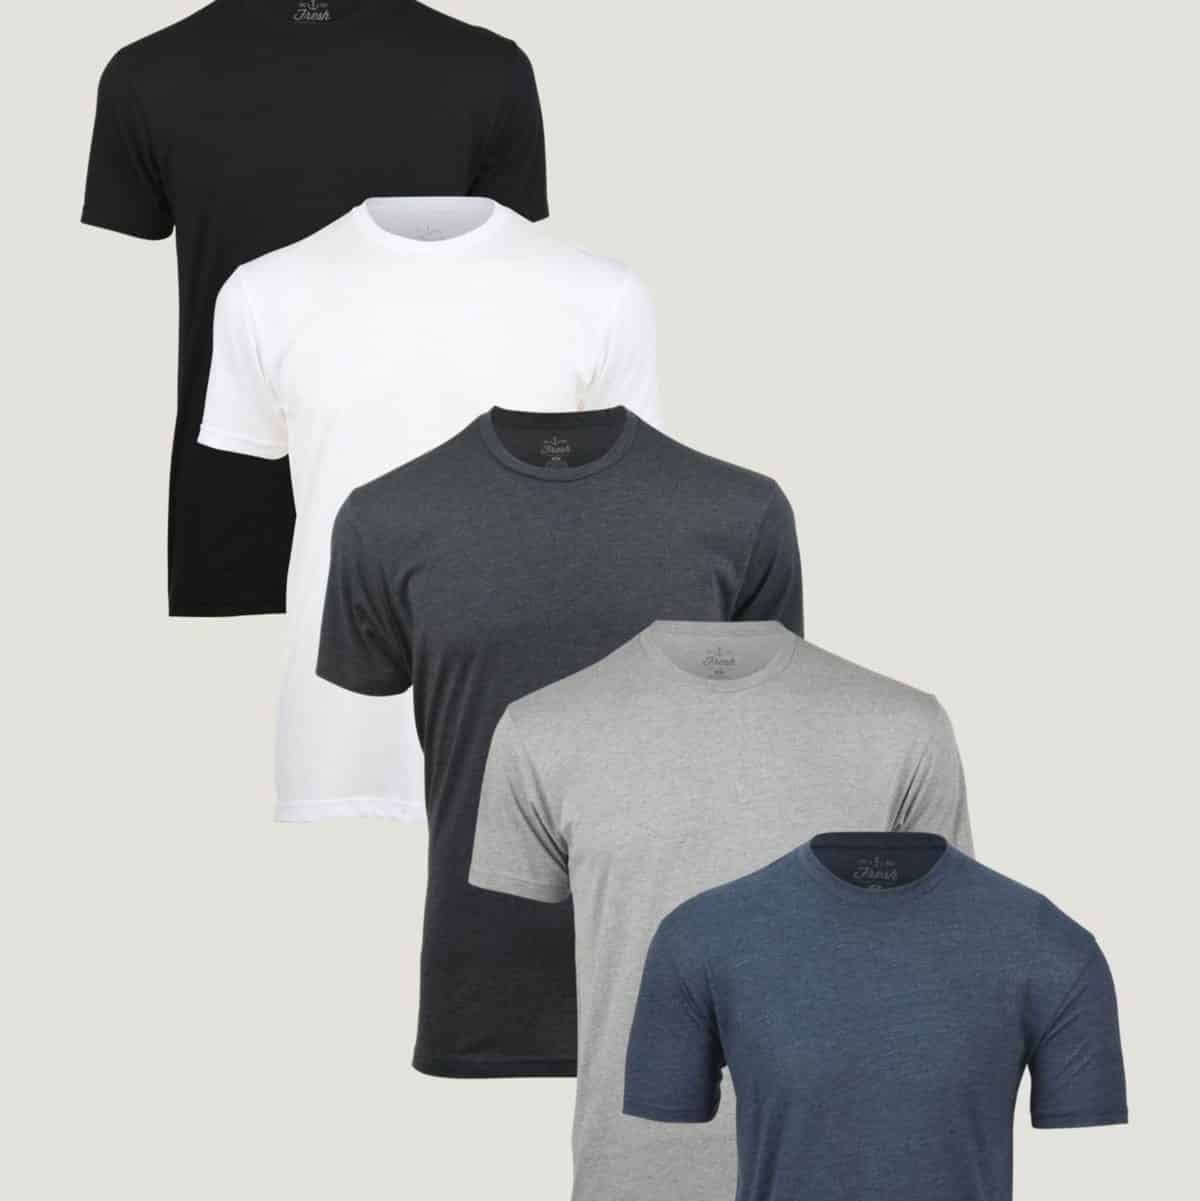 Fresh Clean Tees Review - Must Read This Before Buying